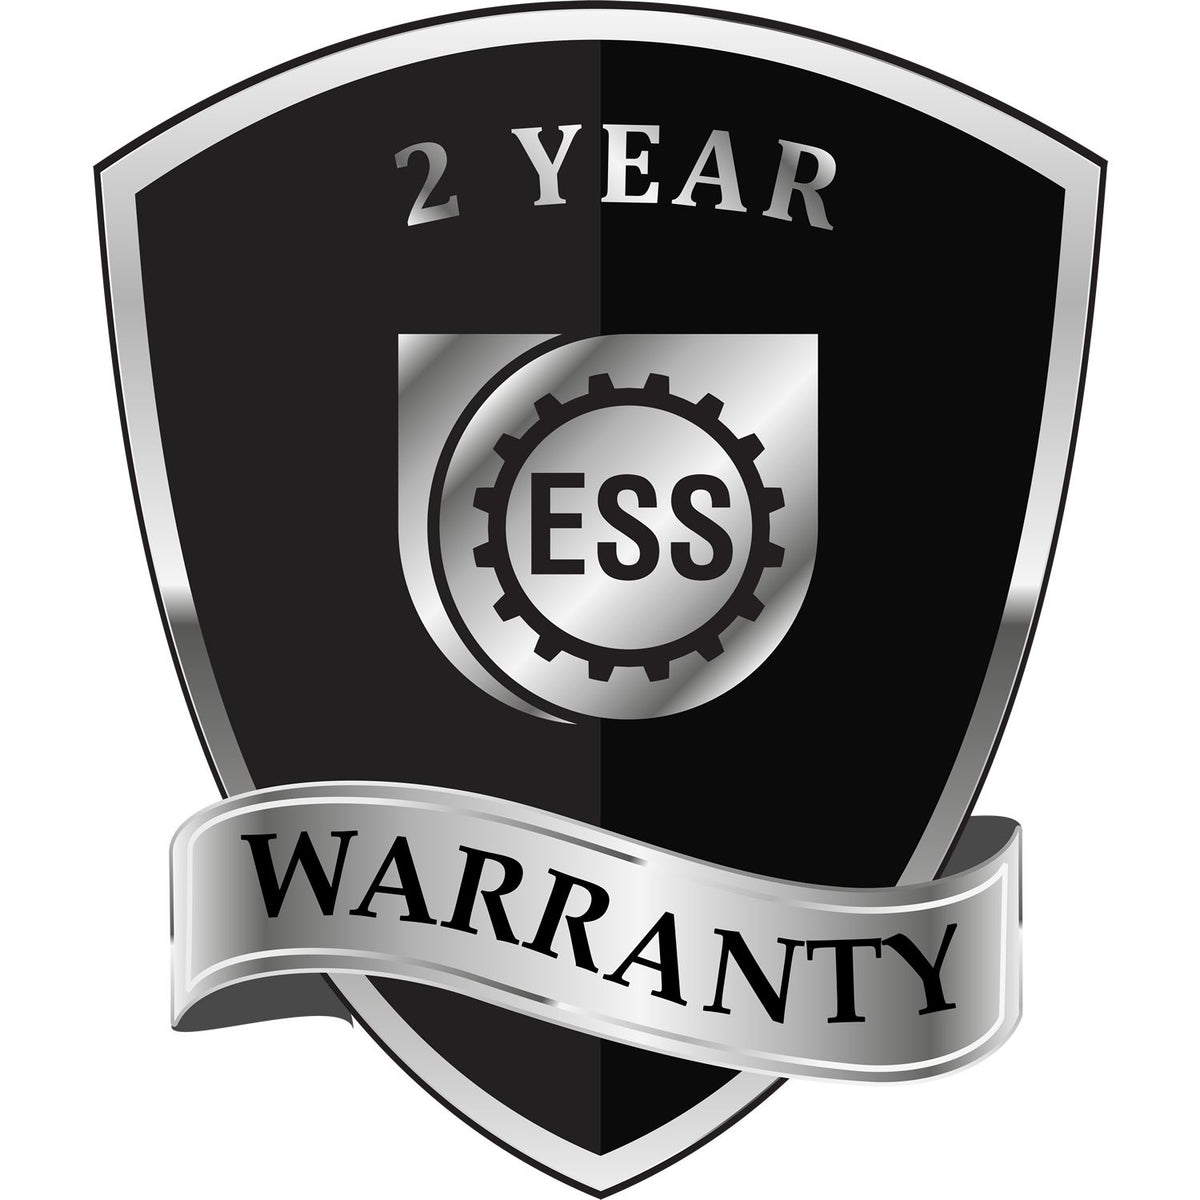 A badge or emblem showing a warranty icon for the State of Missouri Extended Long Reach Engineer Seal